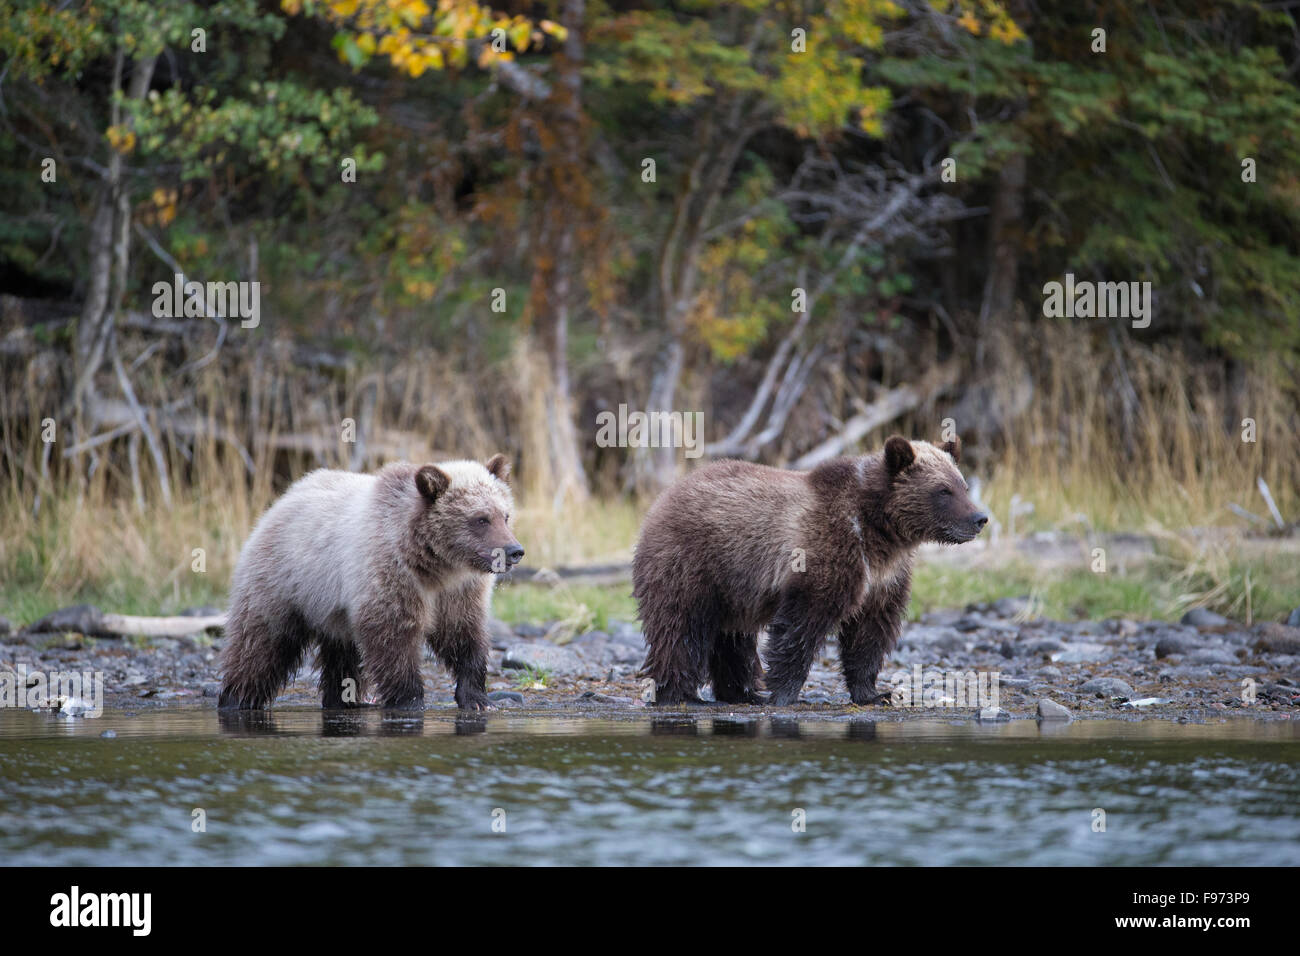 Grizzly bear (Ursus arctos horribilis), cubs of the year eating  salmon (Oncorhynchus sp.), Central Interior, British Columbia. Stock Photo